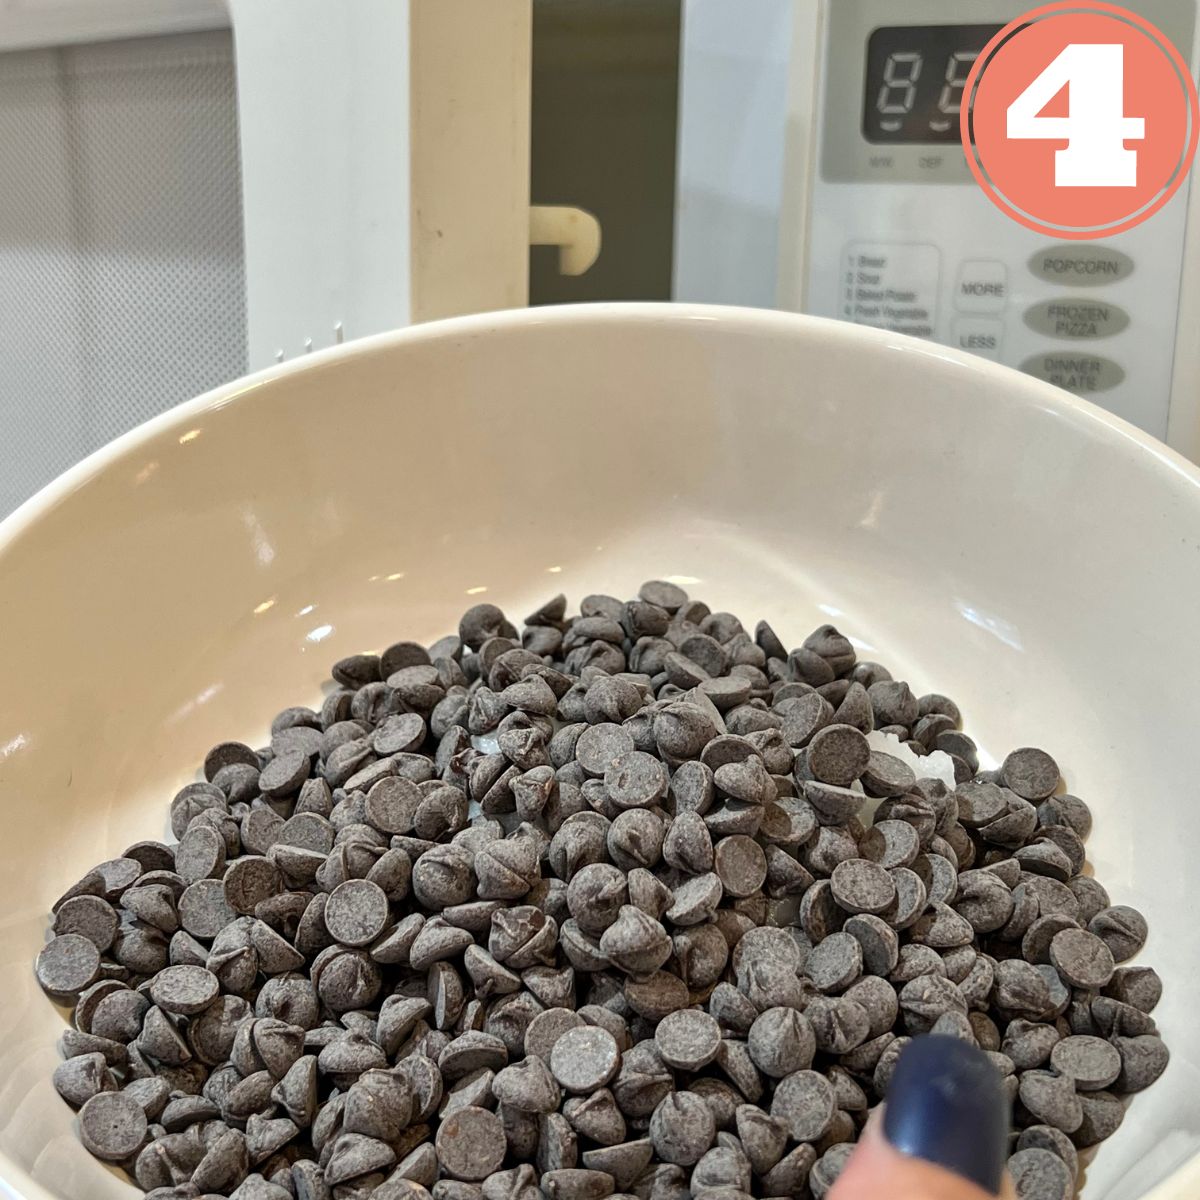 A bowl of Lily's chocolate chips